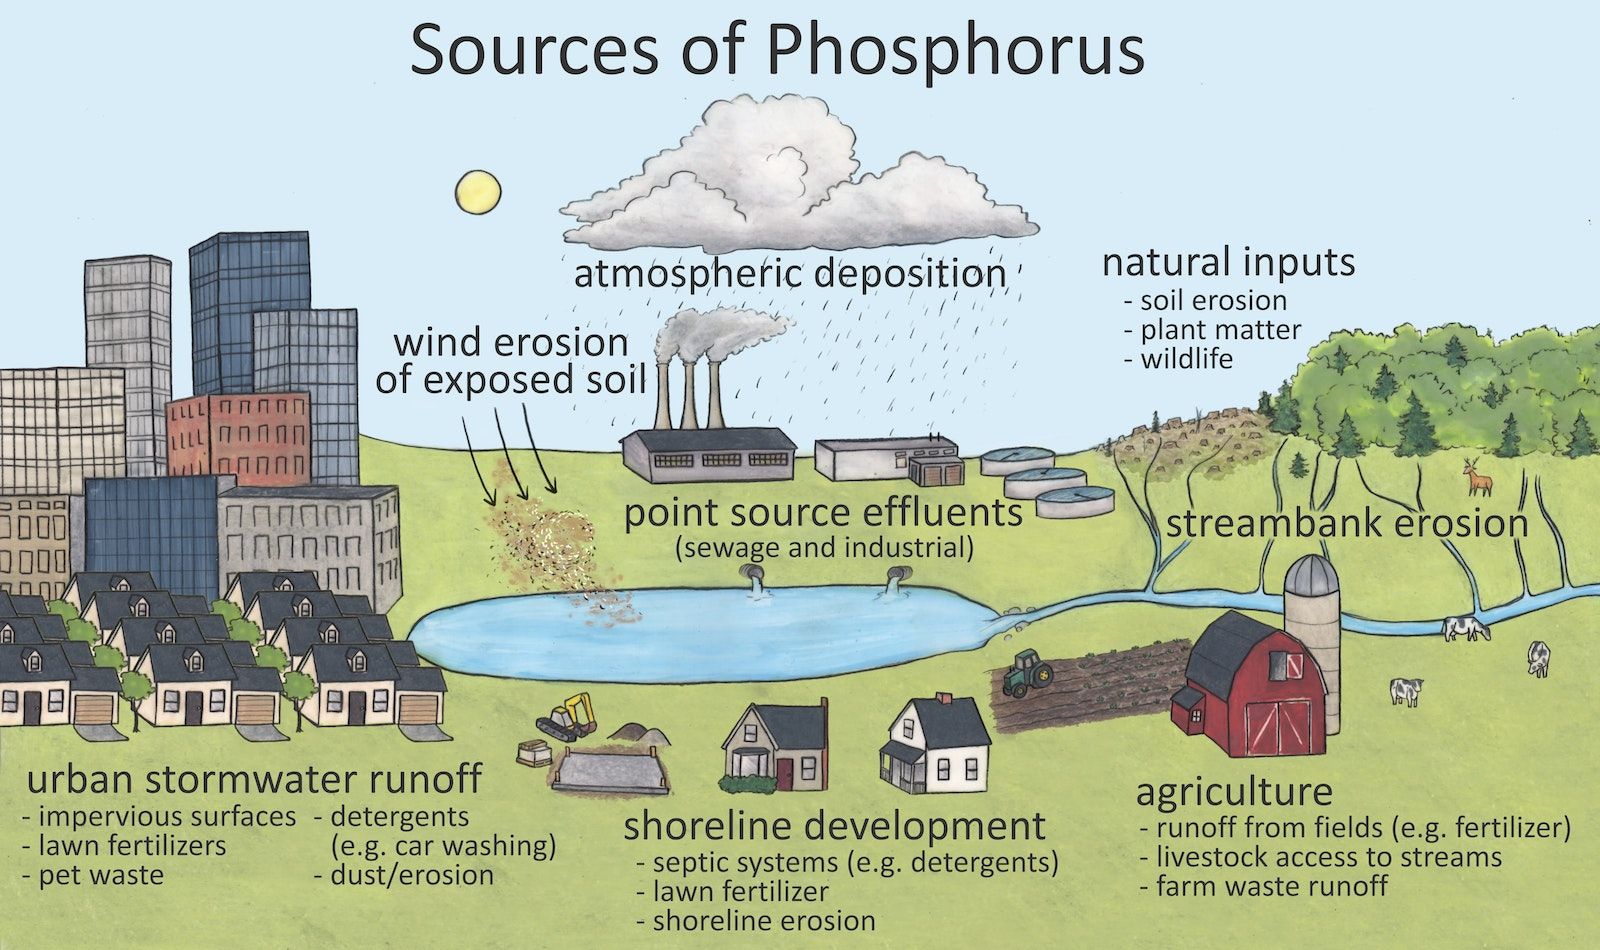 Hand drawn image illustrating phosphorus inputs to a pond from natural processes (illustrated by soil erosion from hillsides), agriculture (illustrated by a farm on the edge of the pond), shoreline development (illustrated by houses built on the edge of the pond), urban stormwater runoff (illustrated by a sketch of a city), wind erosion from exposed soils, and atmospheric deposition by rain.